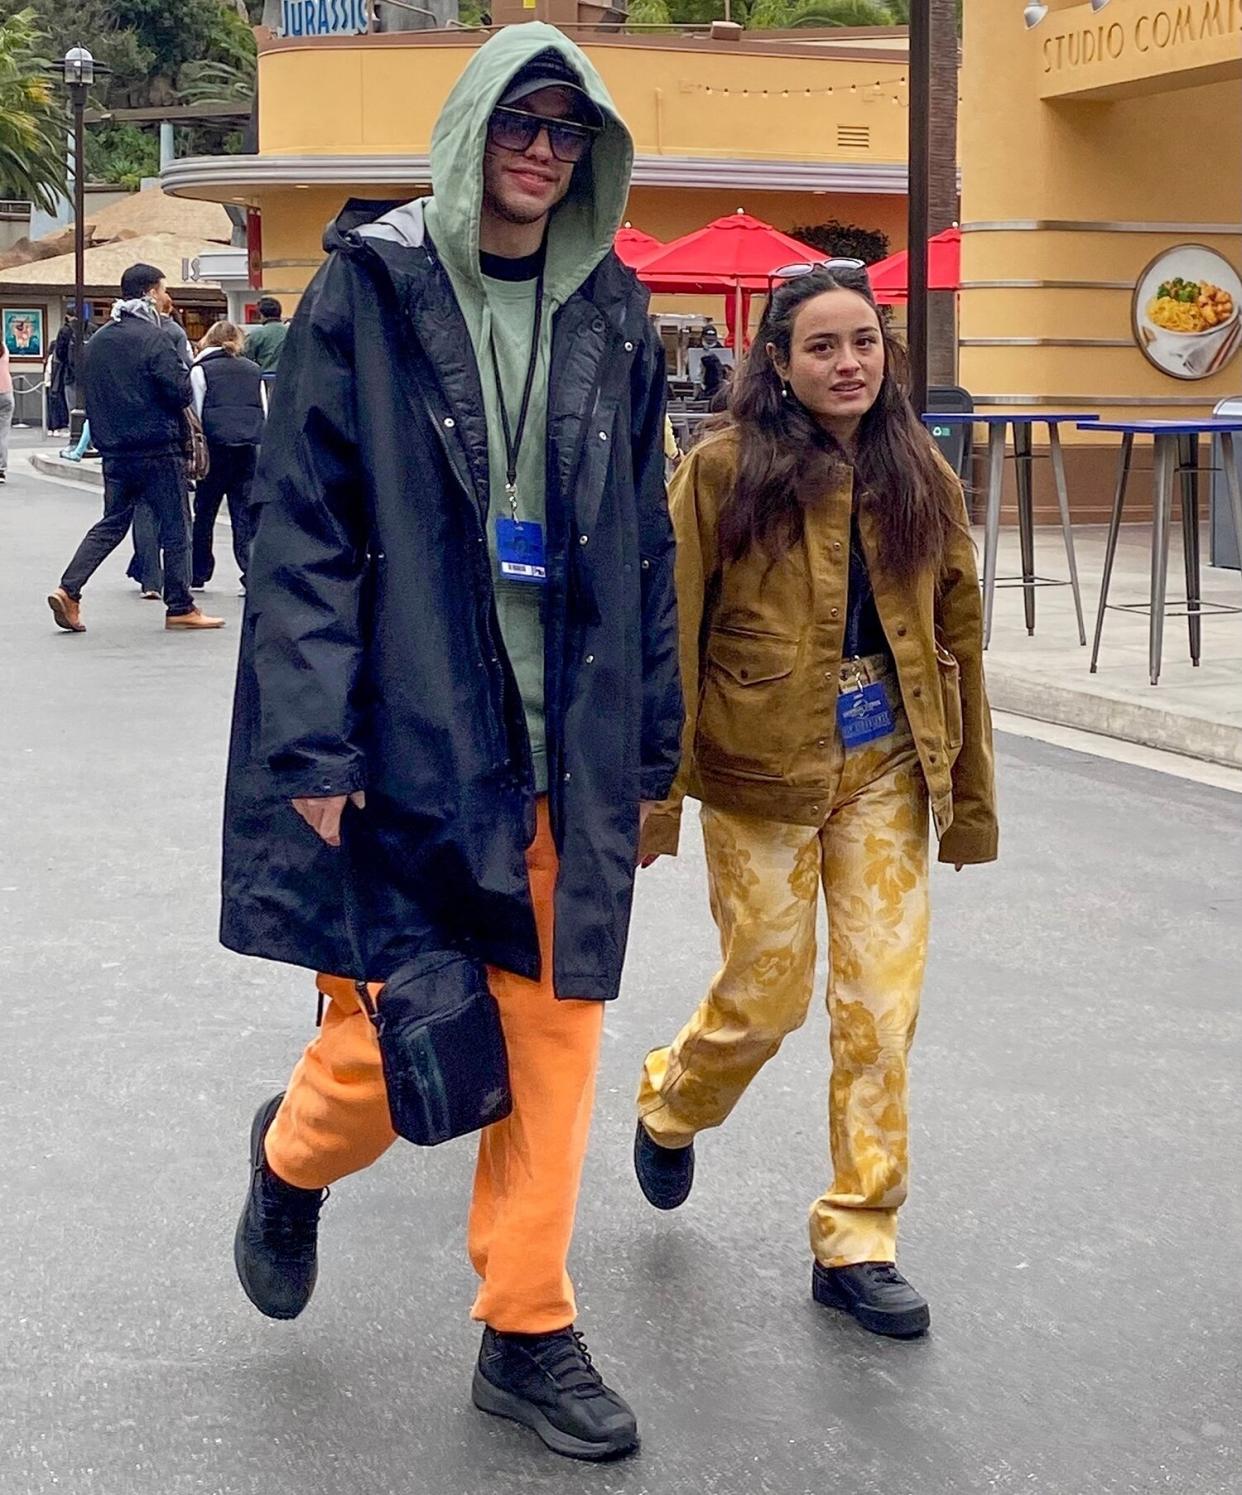 *EXCLUSIVE* Pete Davidson and his girlfriend spend the day at Universal Studios